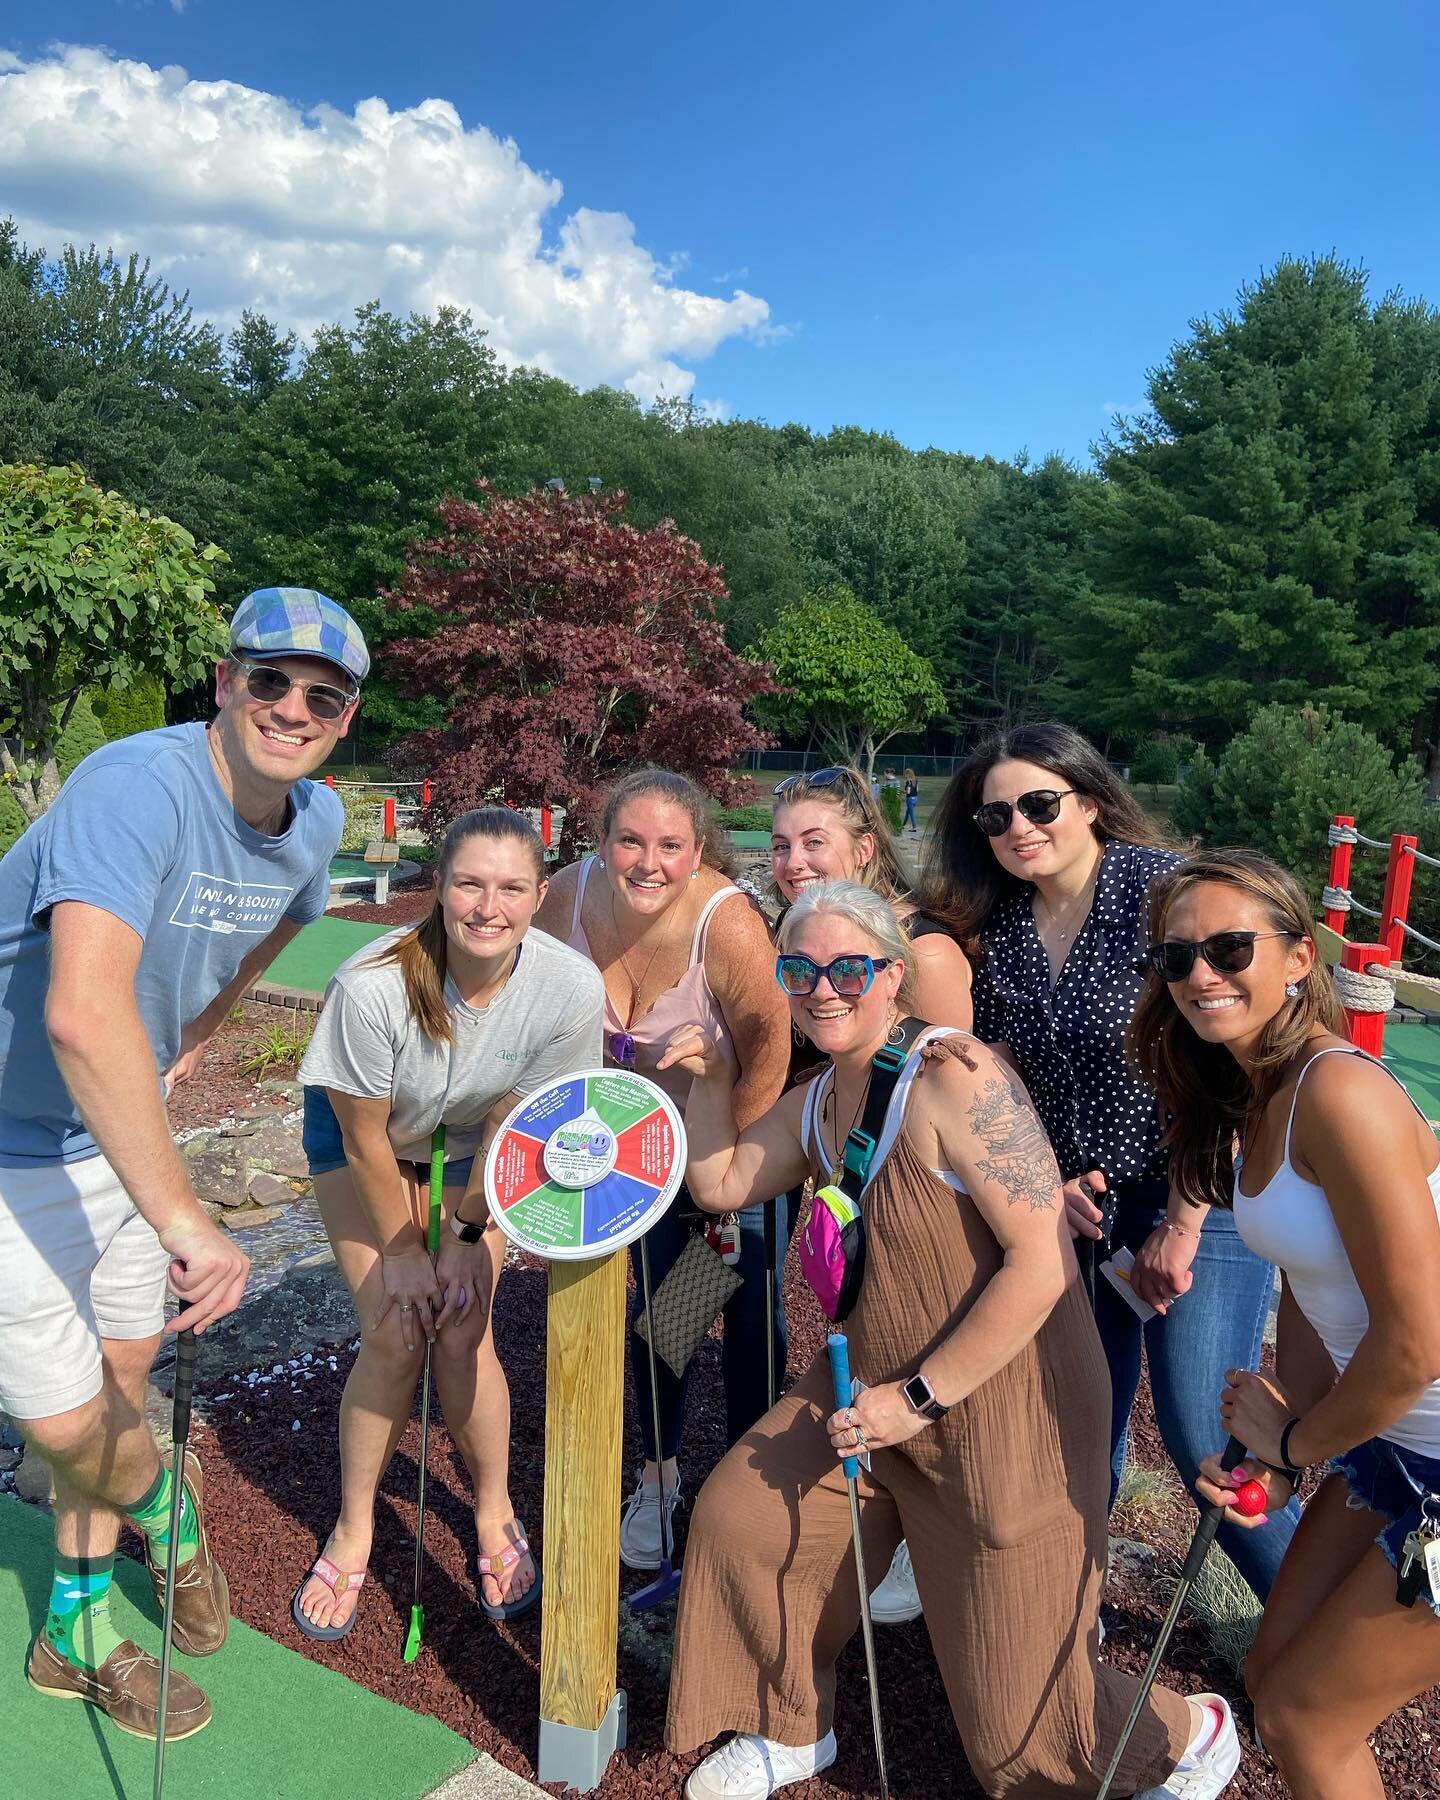 It was time for the CDM team to get out of the office and enjoy a staff outing this afternoon. While the mini golf course was not kind to all, it led to plenty of laughs! #childrensdentistryofmaine #fridayfunday #puttputt #saco